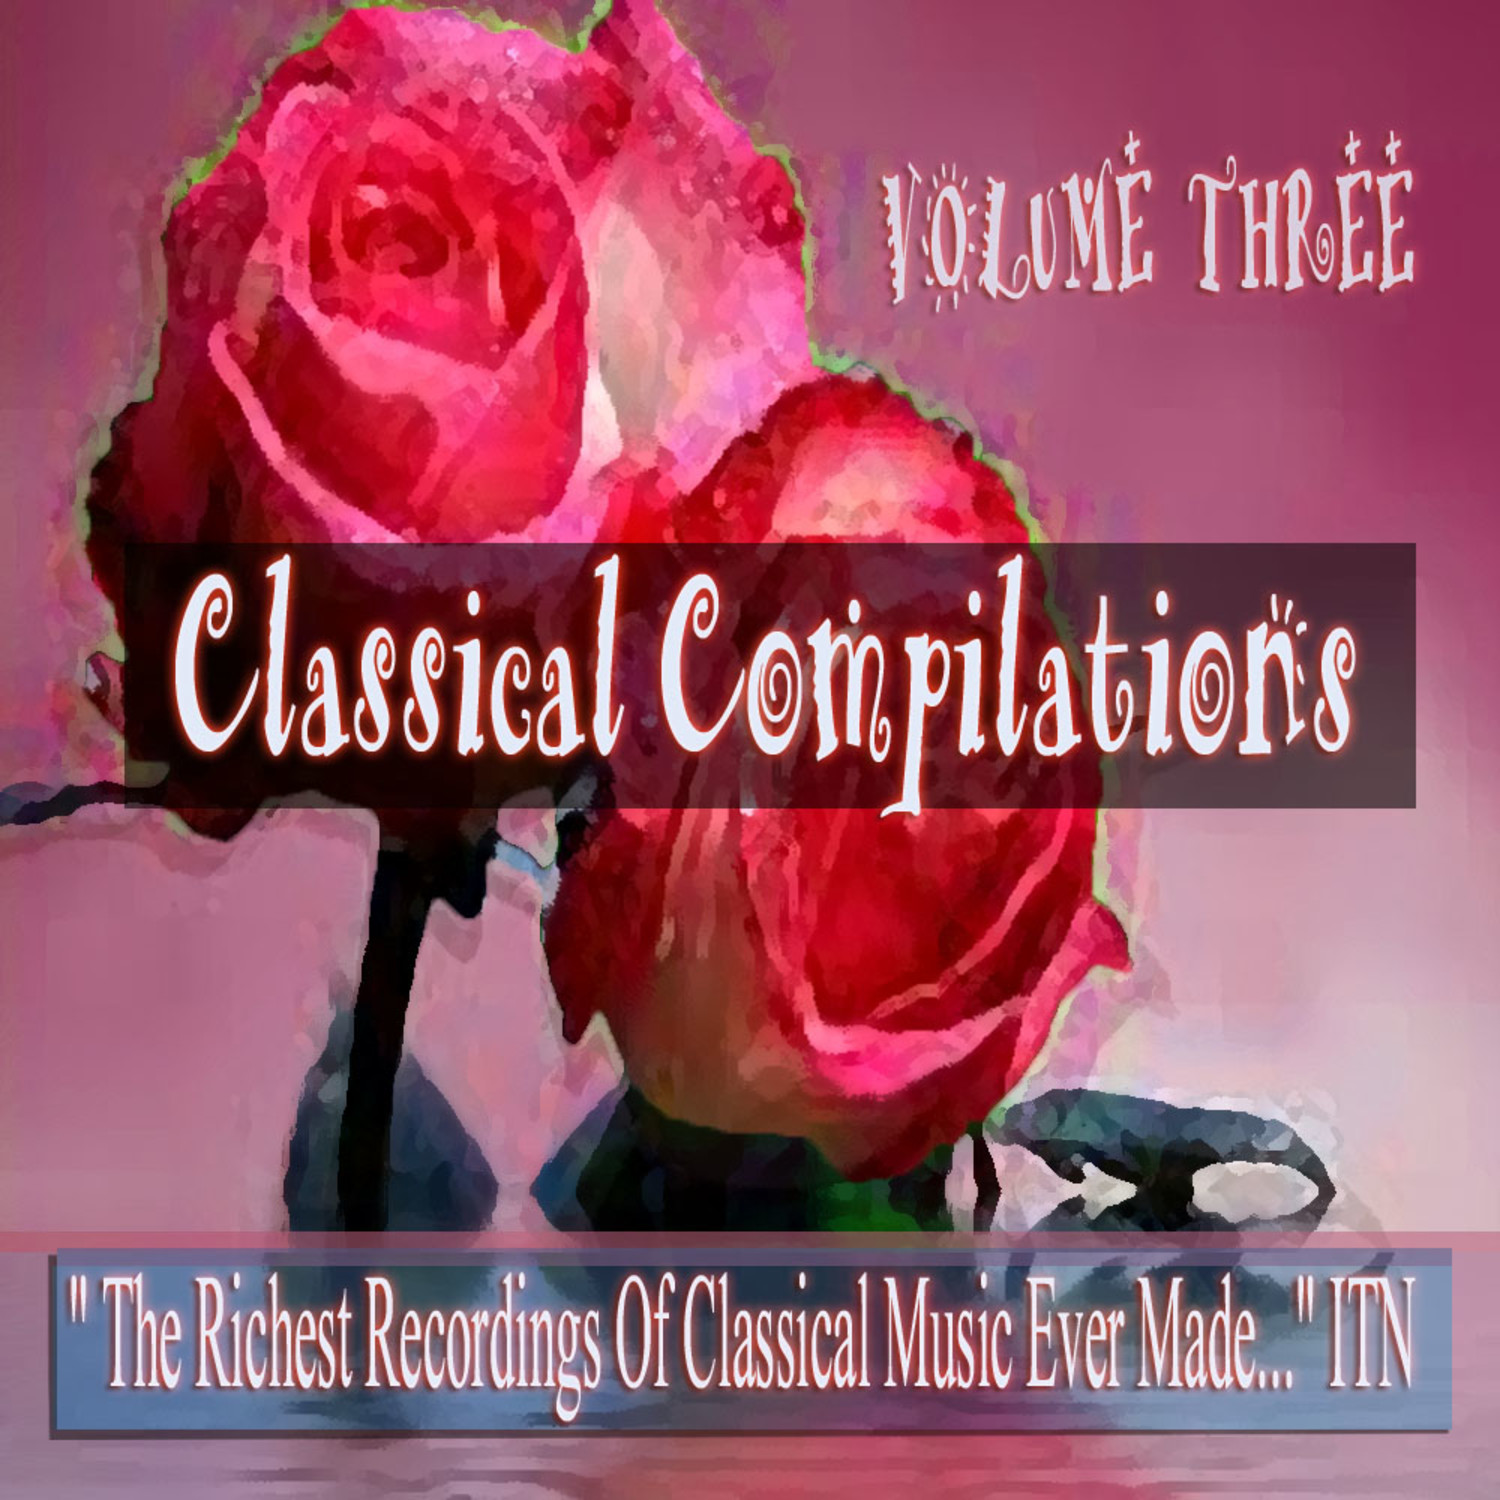 Classical Compilations Volume 3